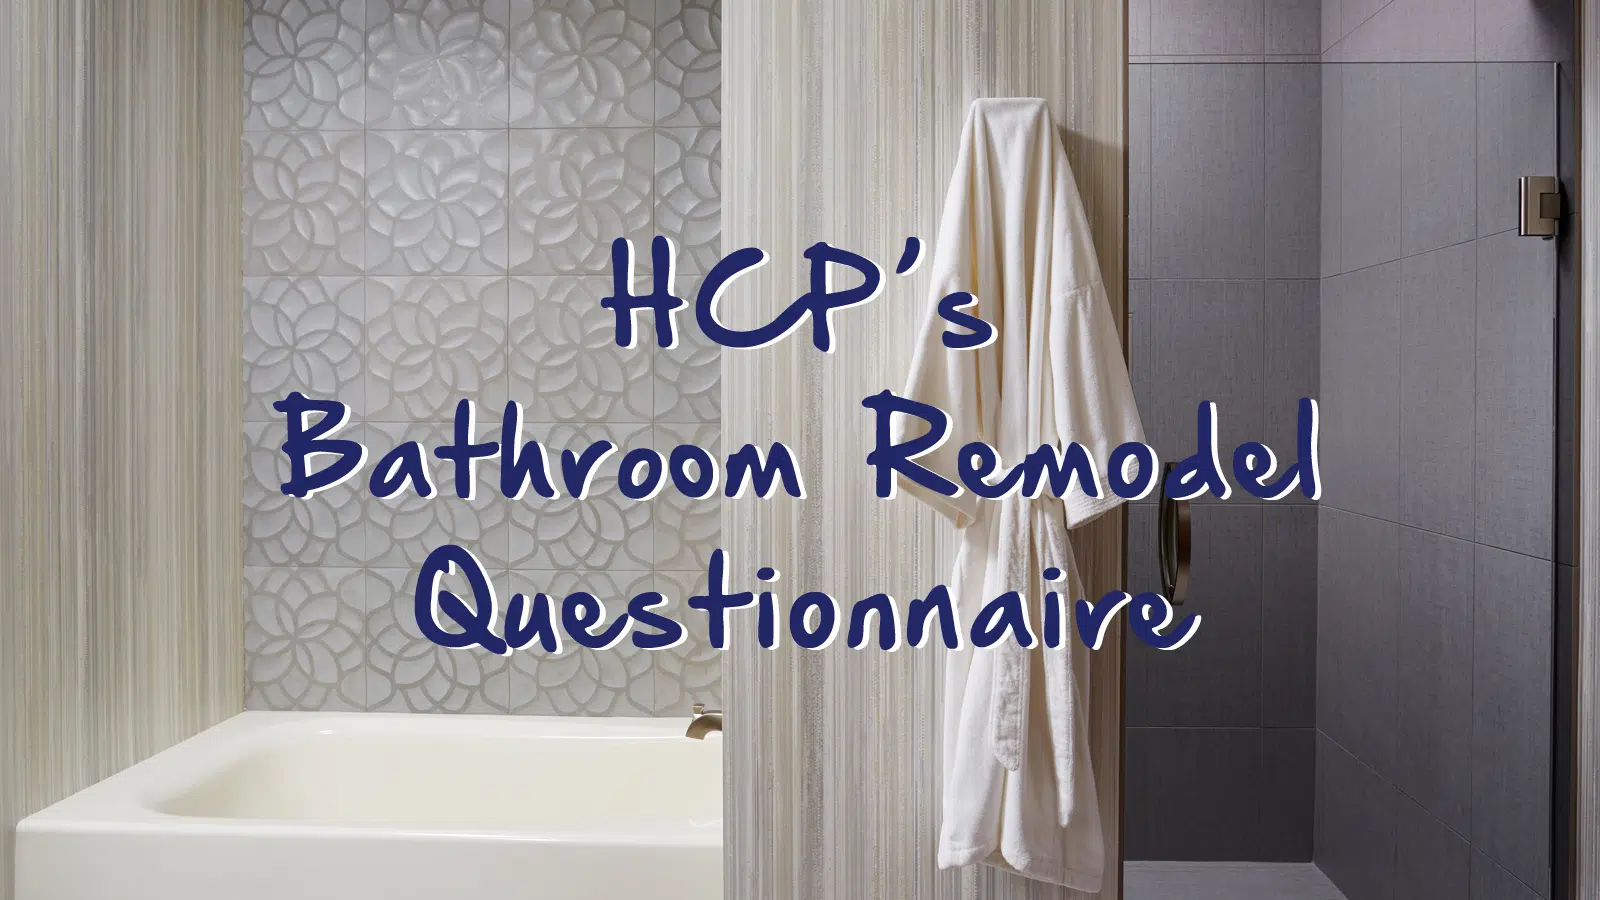 Bathroom Remodel Questionnaire